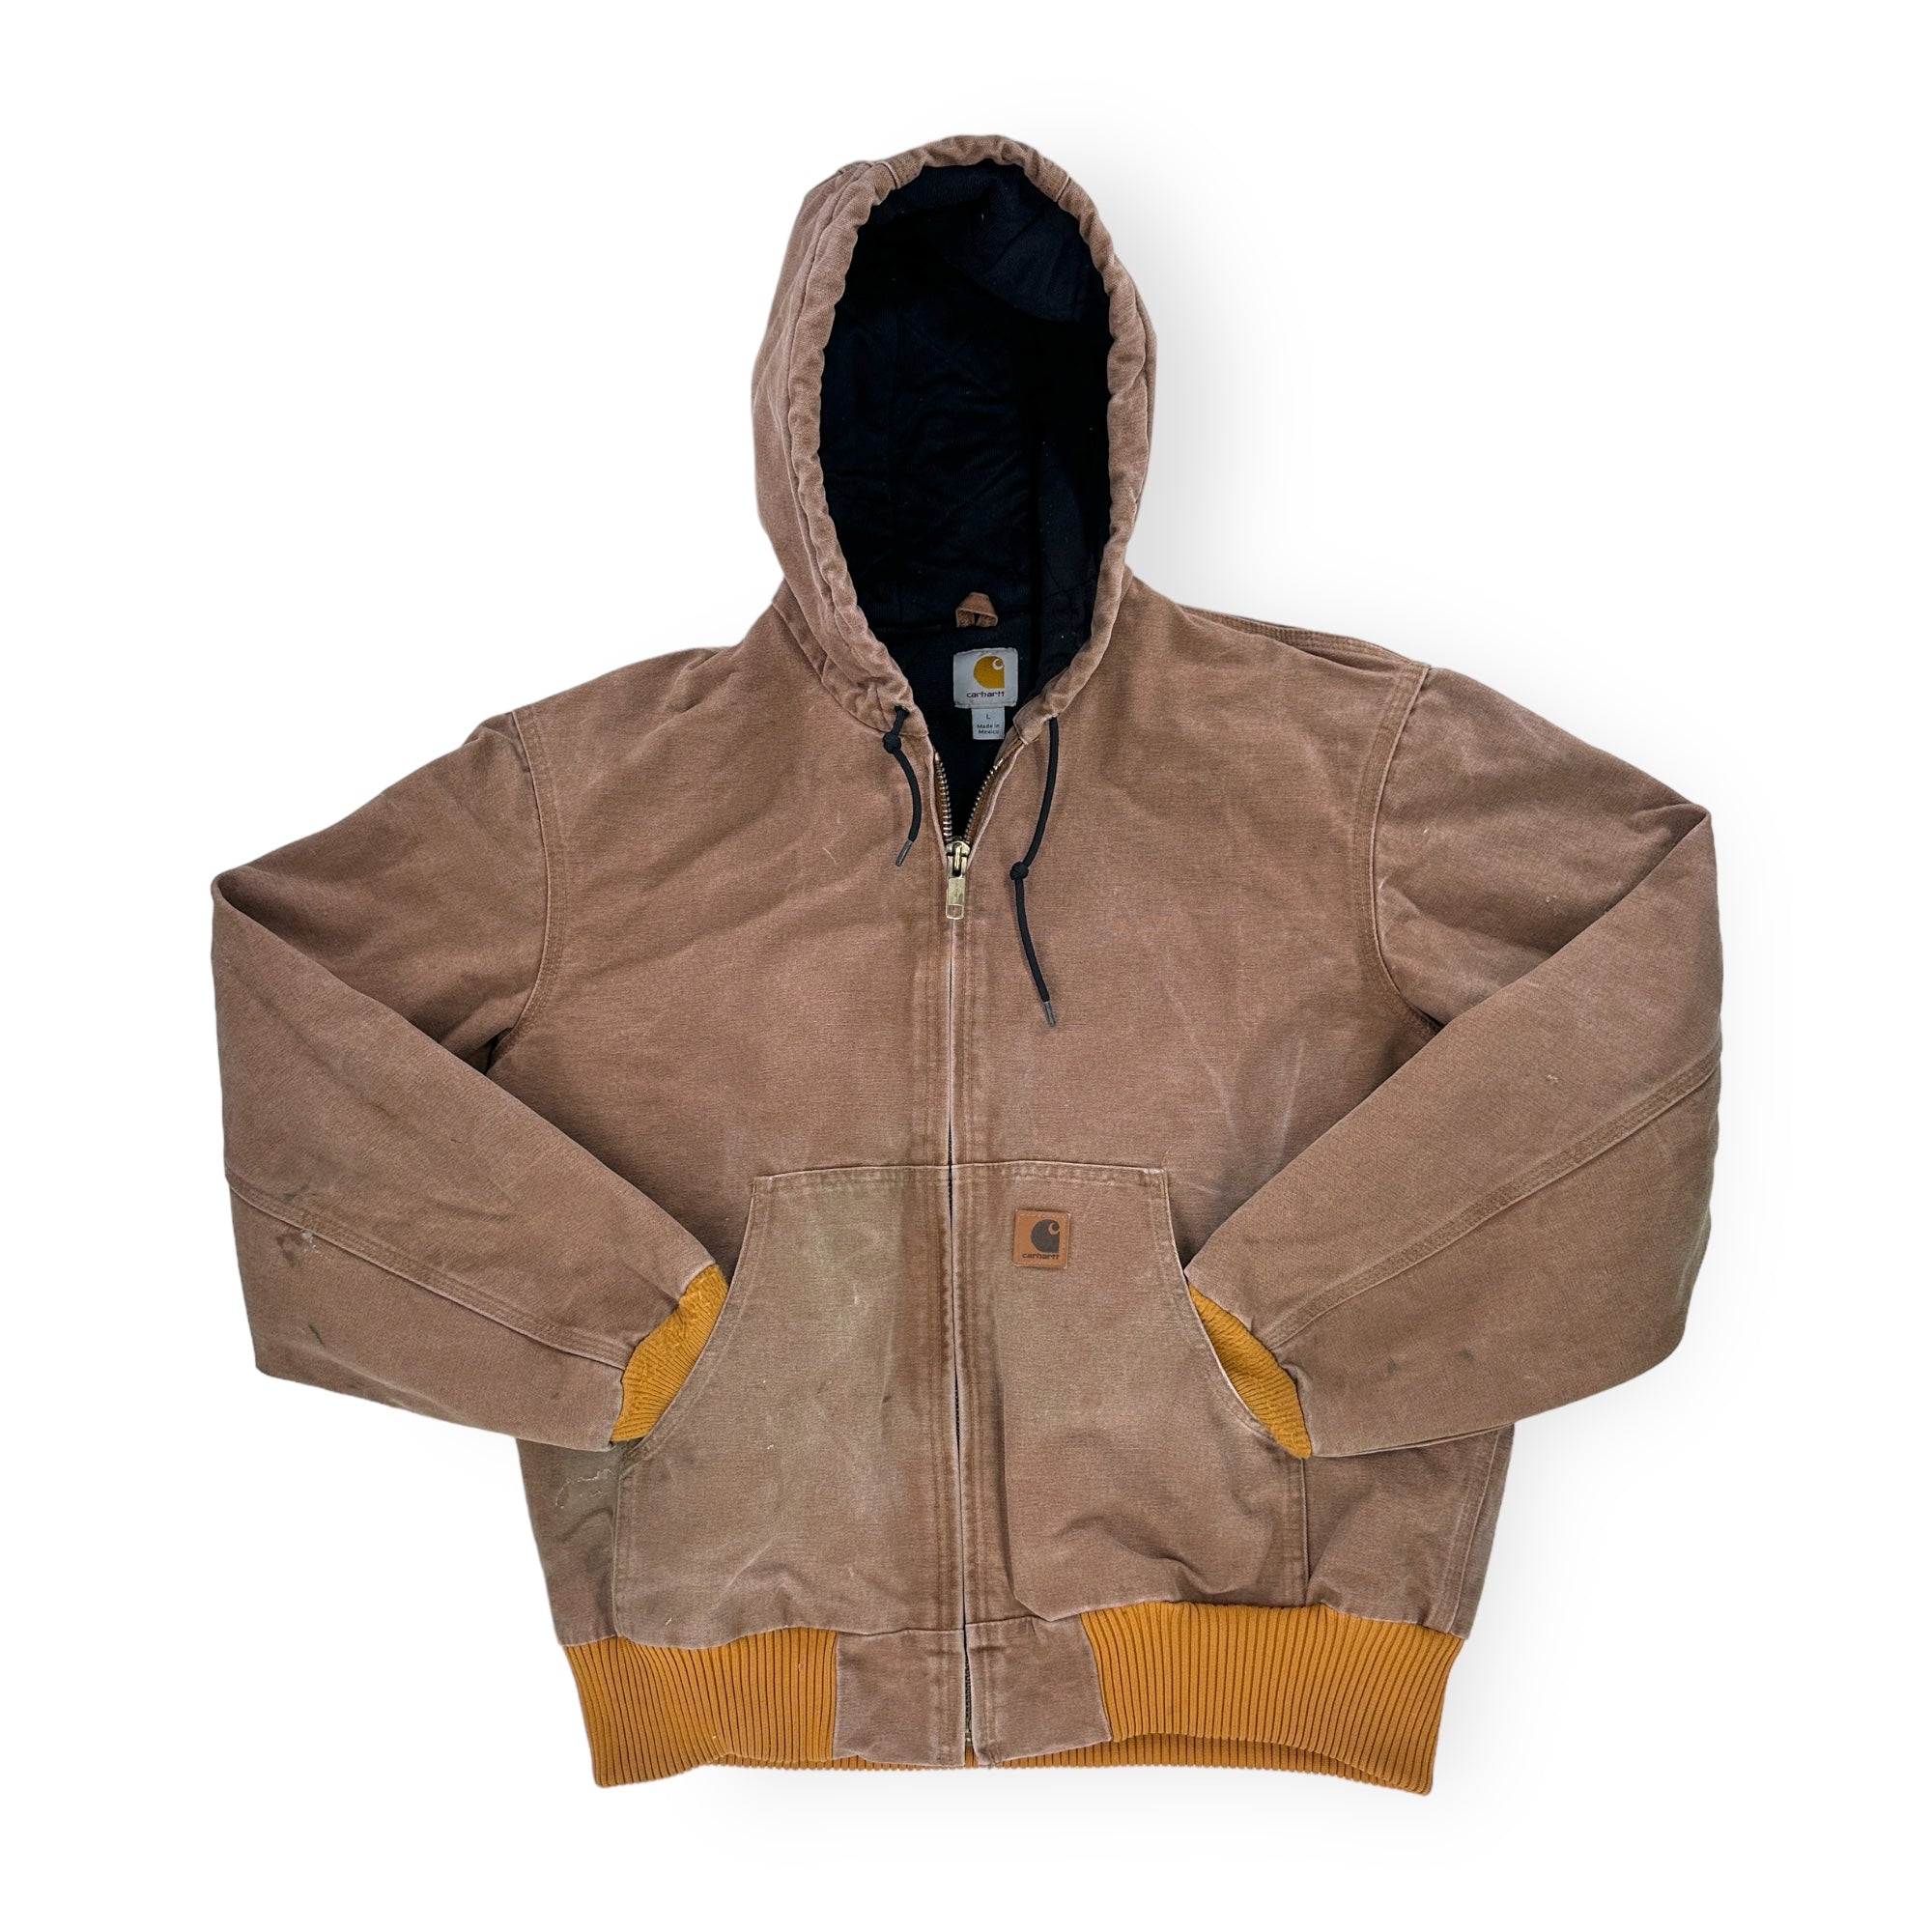 Thrashed and Dyed Carhartt J130 Jacket - Large Great Lakes Reclaimed Denim